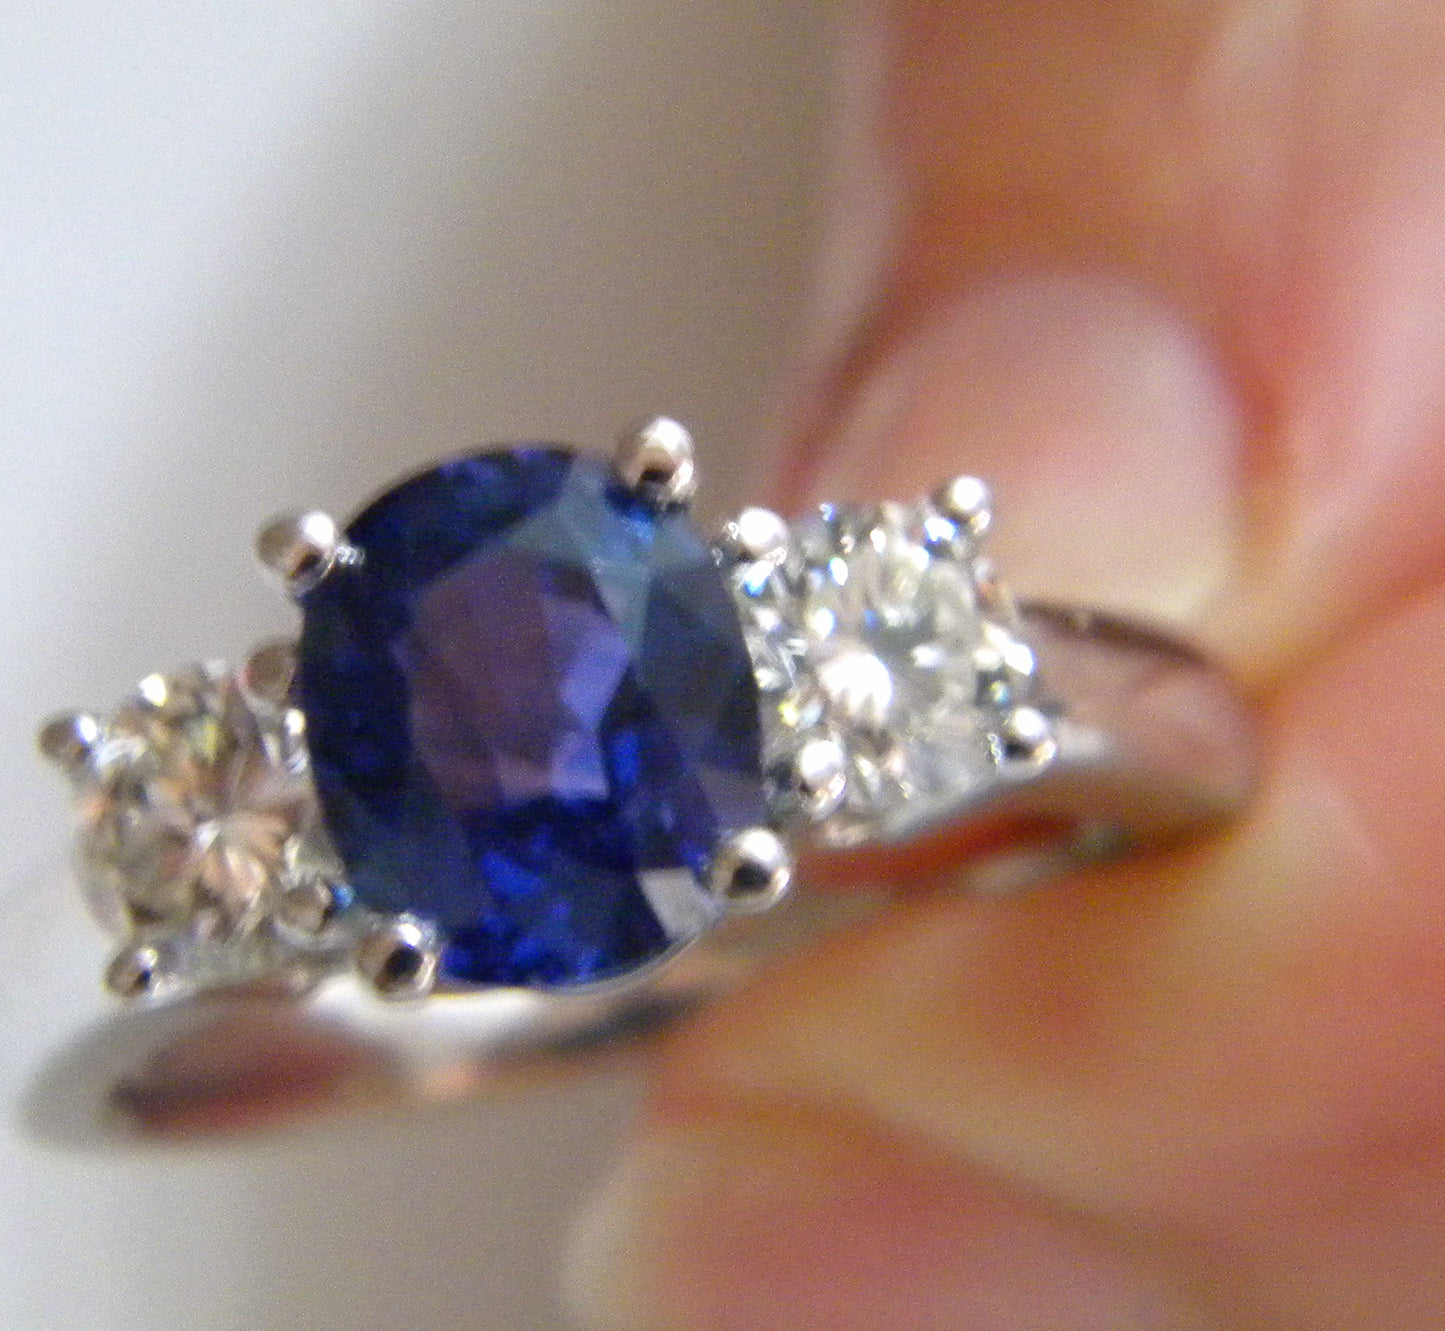 5.10ct Cushion Sapphire Diamond Engagement Ring JEWELFORME BLUE 18kt White Gold